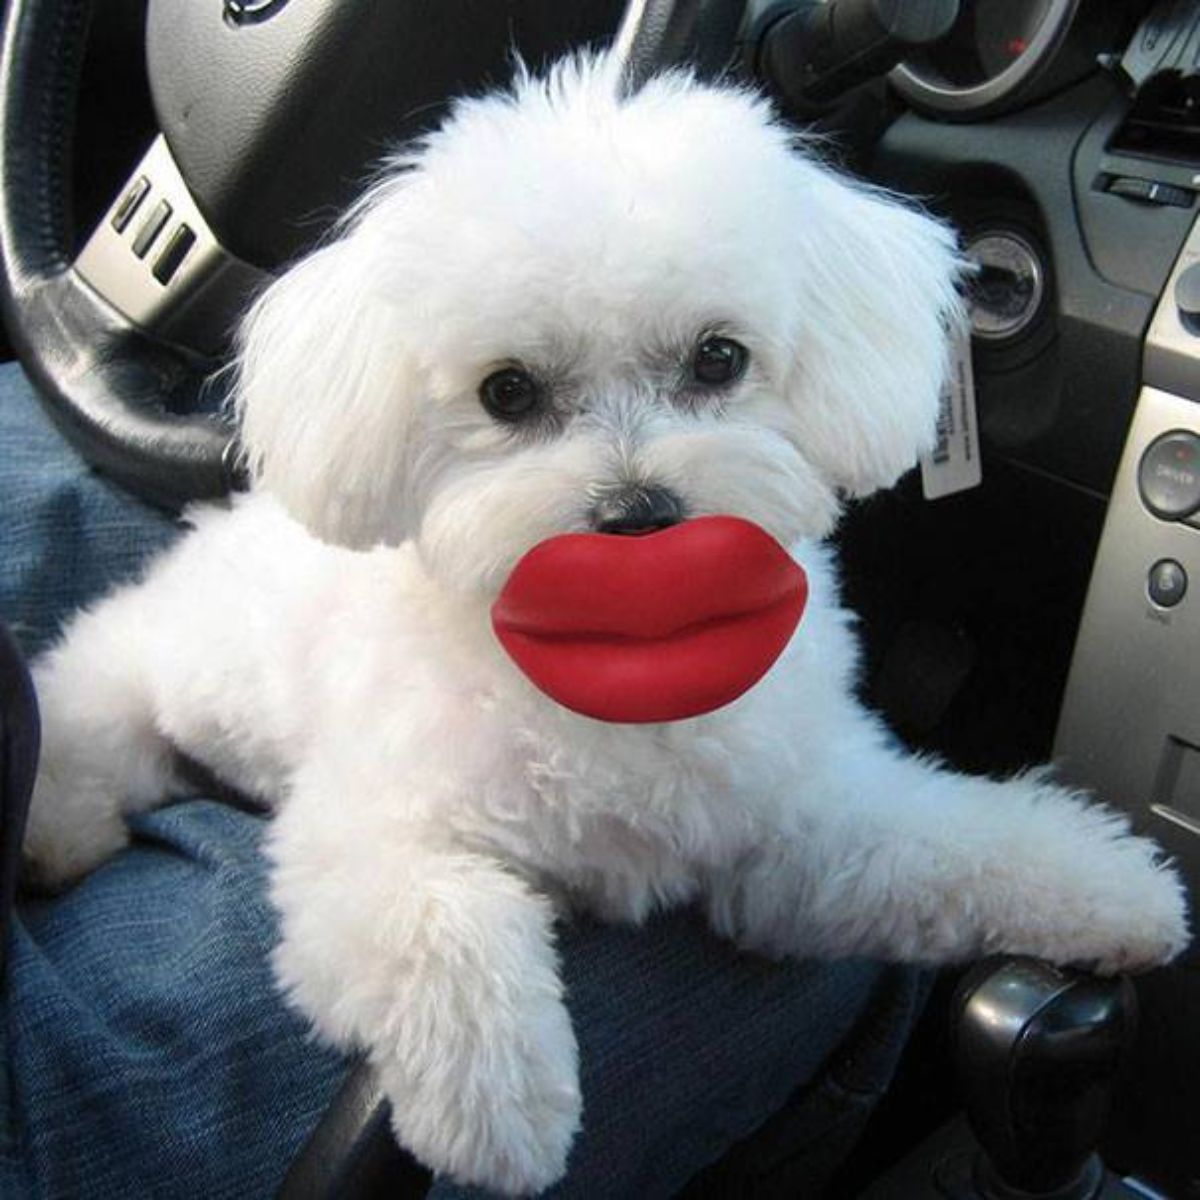 small fluffy white dog holding a toy that looks like a large red pair of lips in its mouth